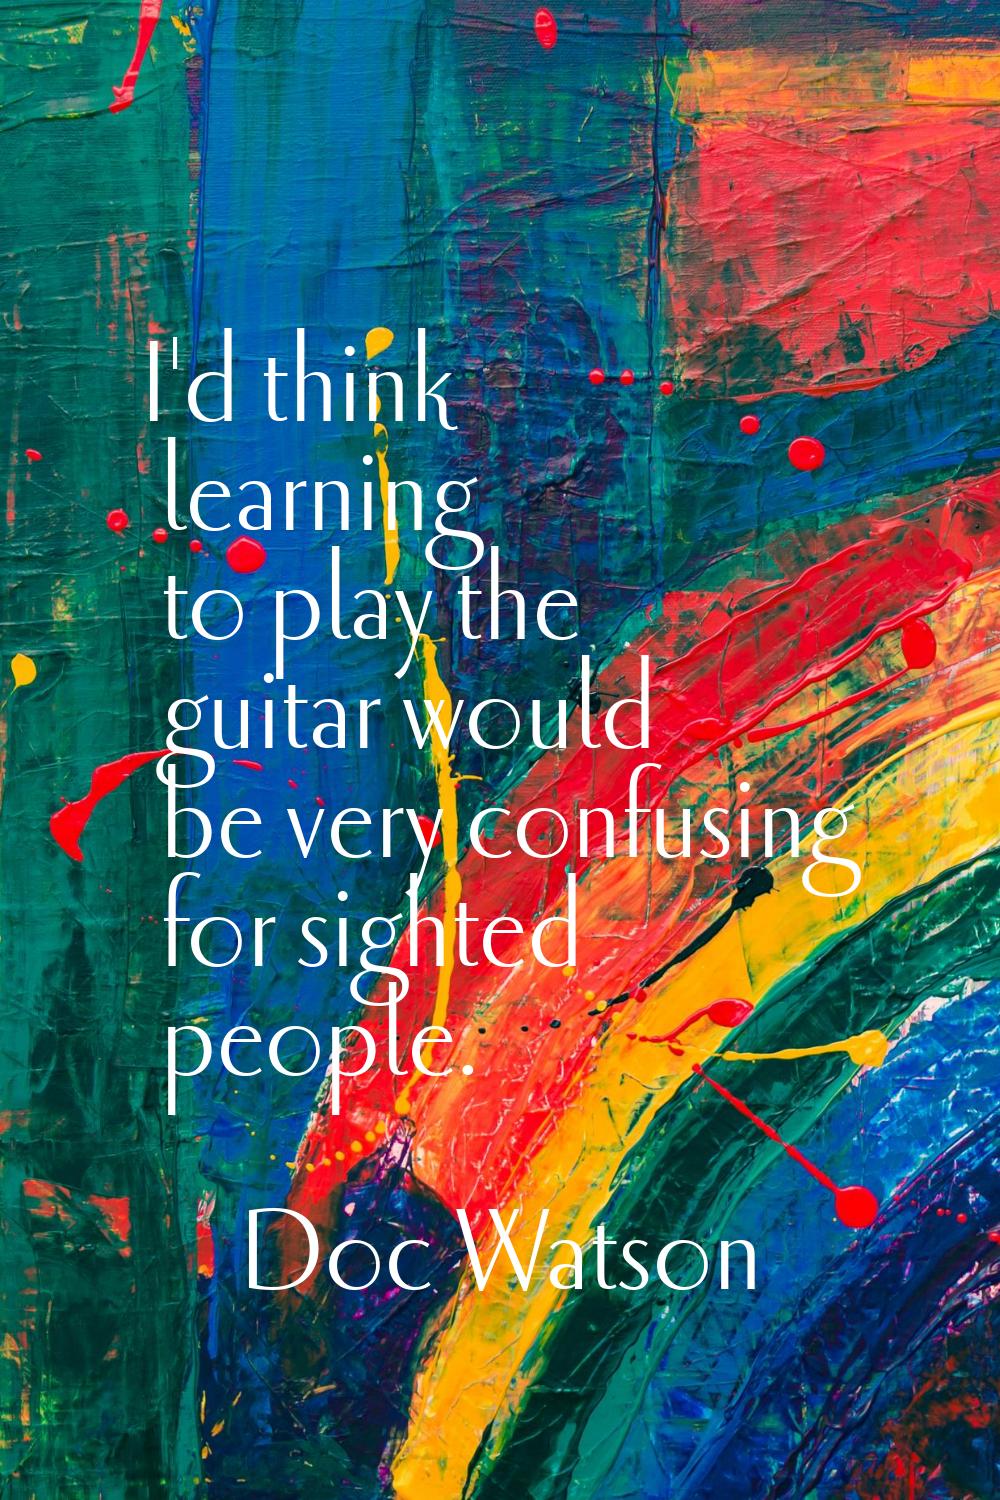 I'd think learning to play the guitar would be very confusing for sighted people.